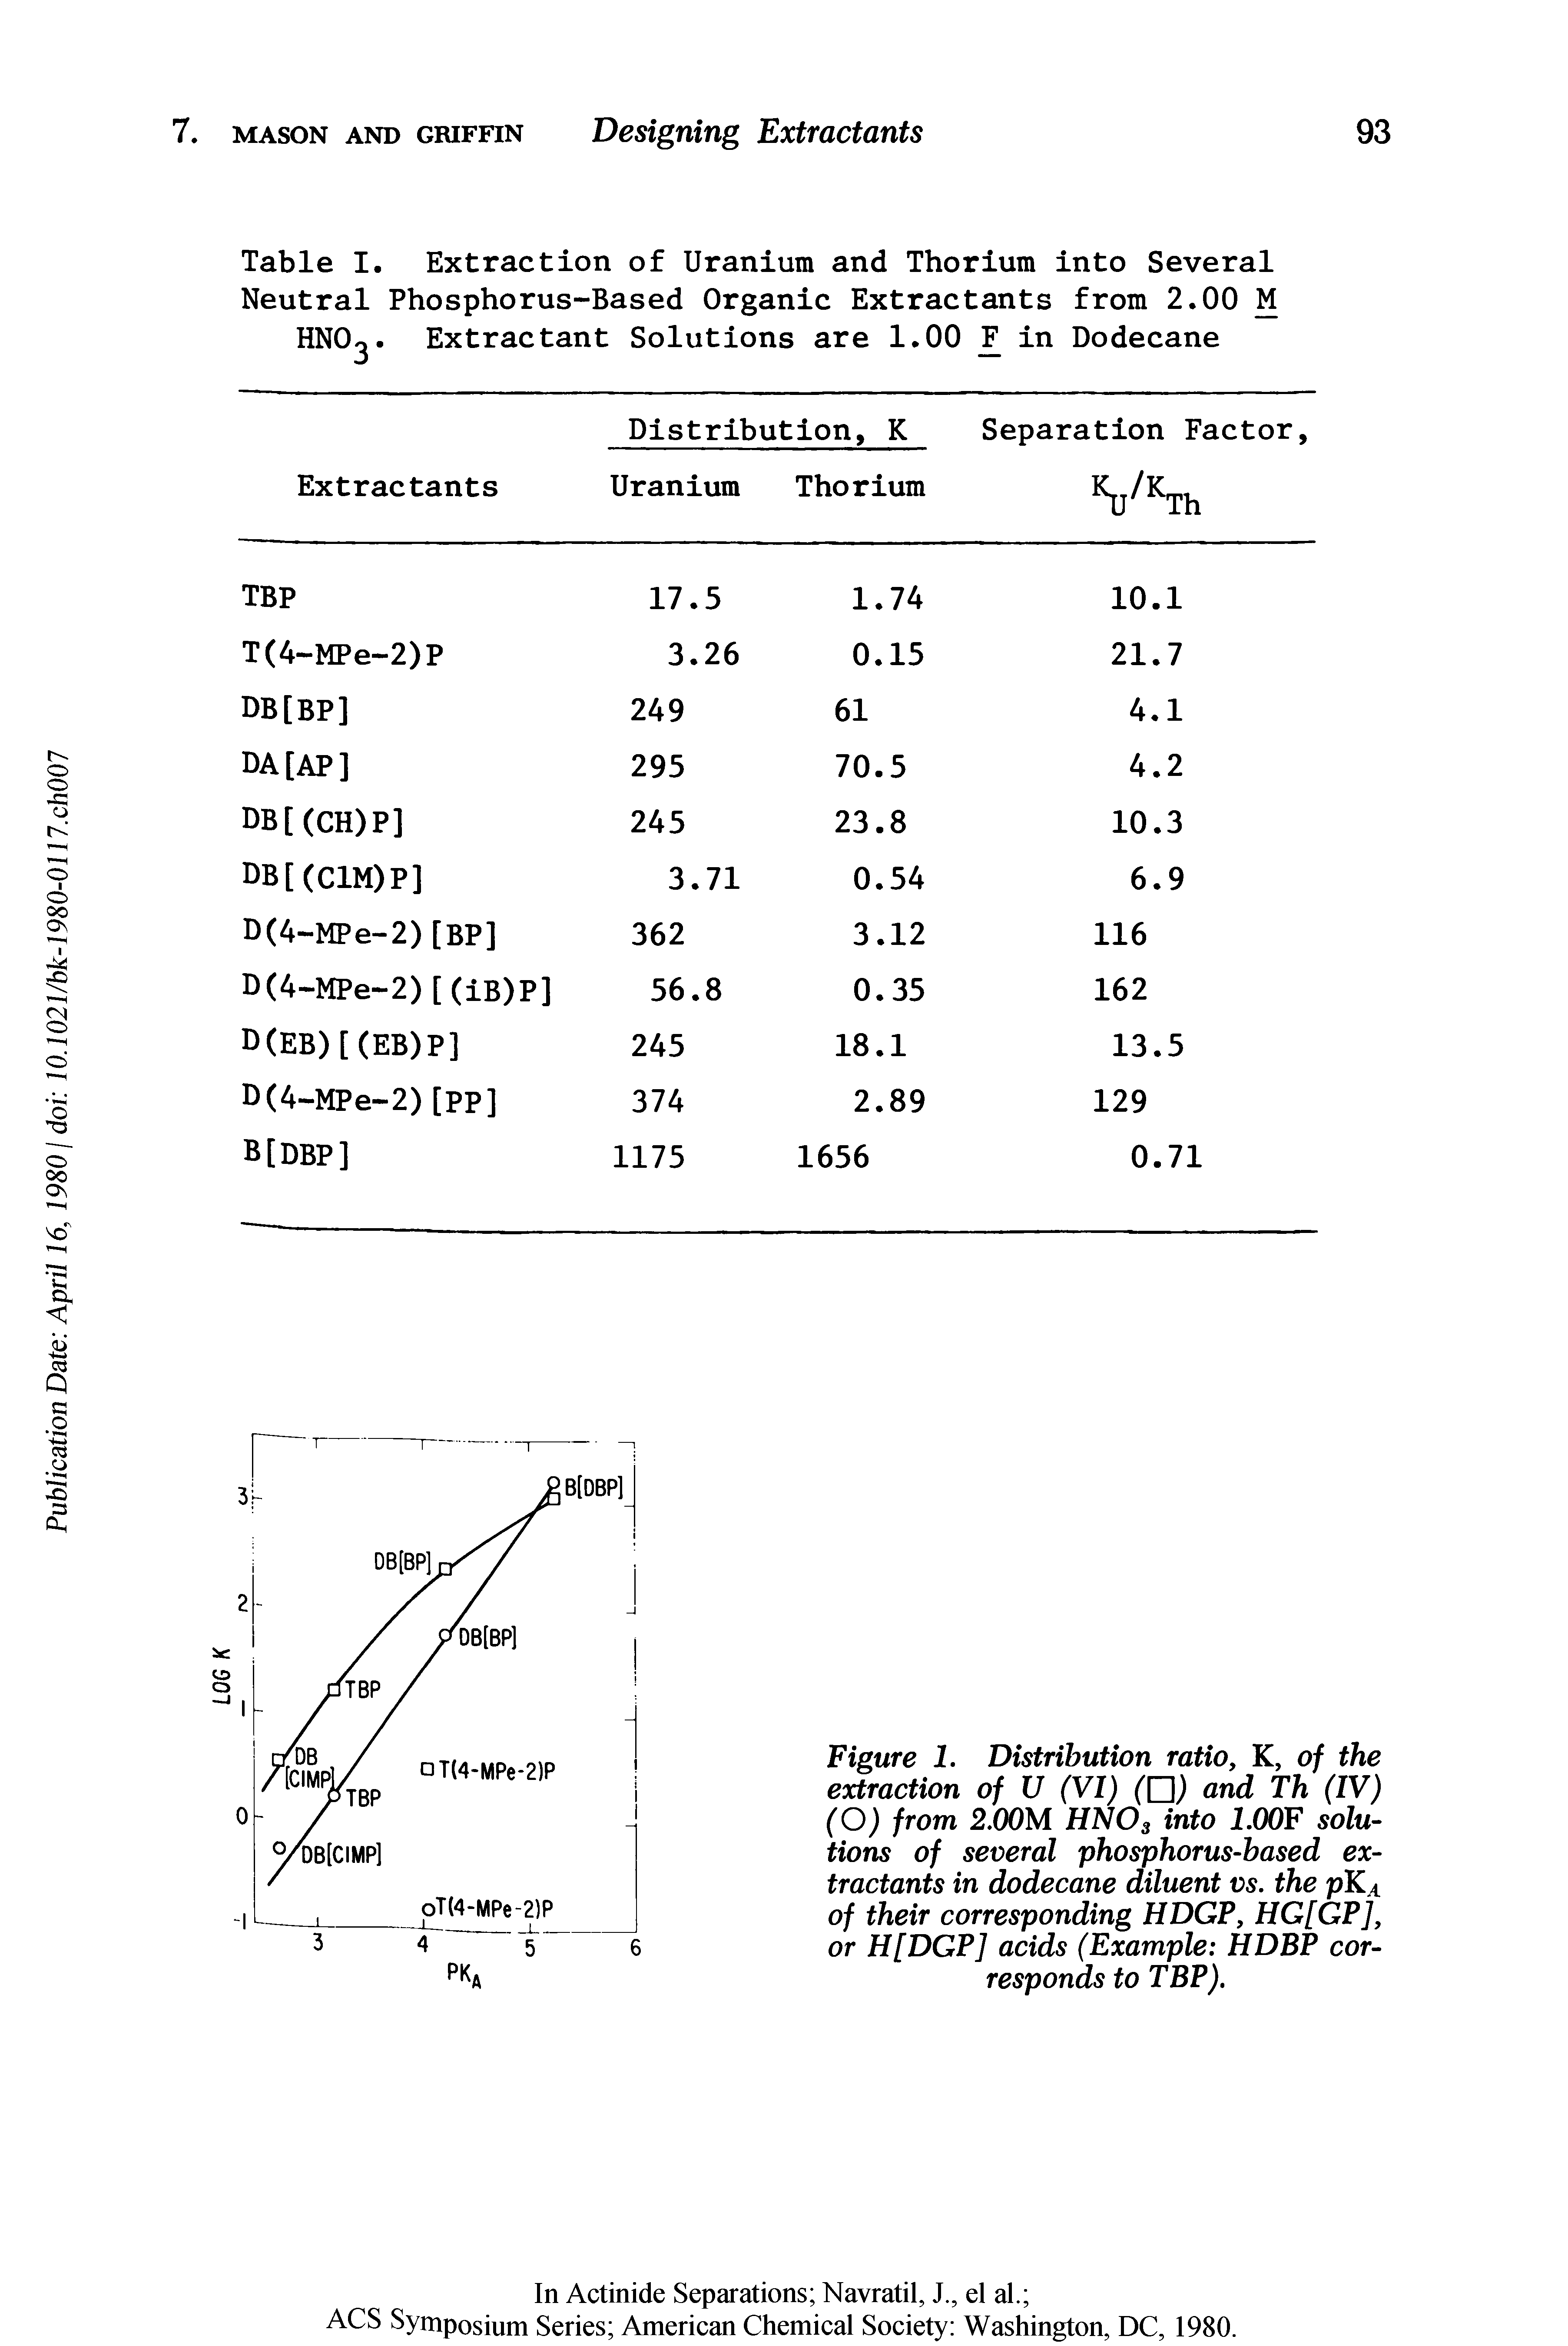 Table I. Extraction of Uranium and Thorium into Several Neutral Phosphorus-Based Organic Extractants from 2.00 M HNO. Extractant Solutions are 1.00 F in Dodecane...